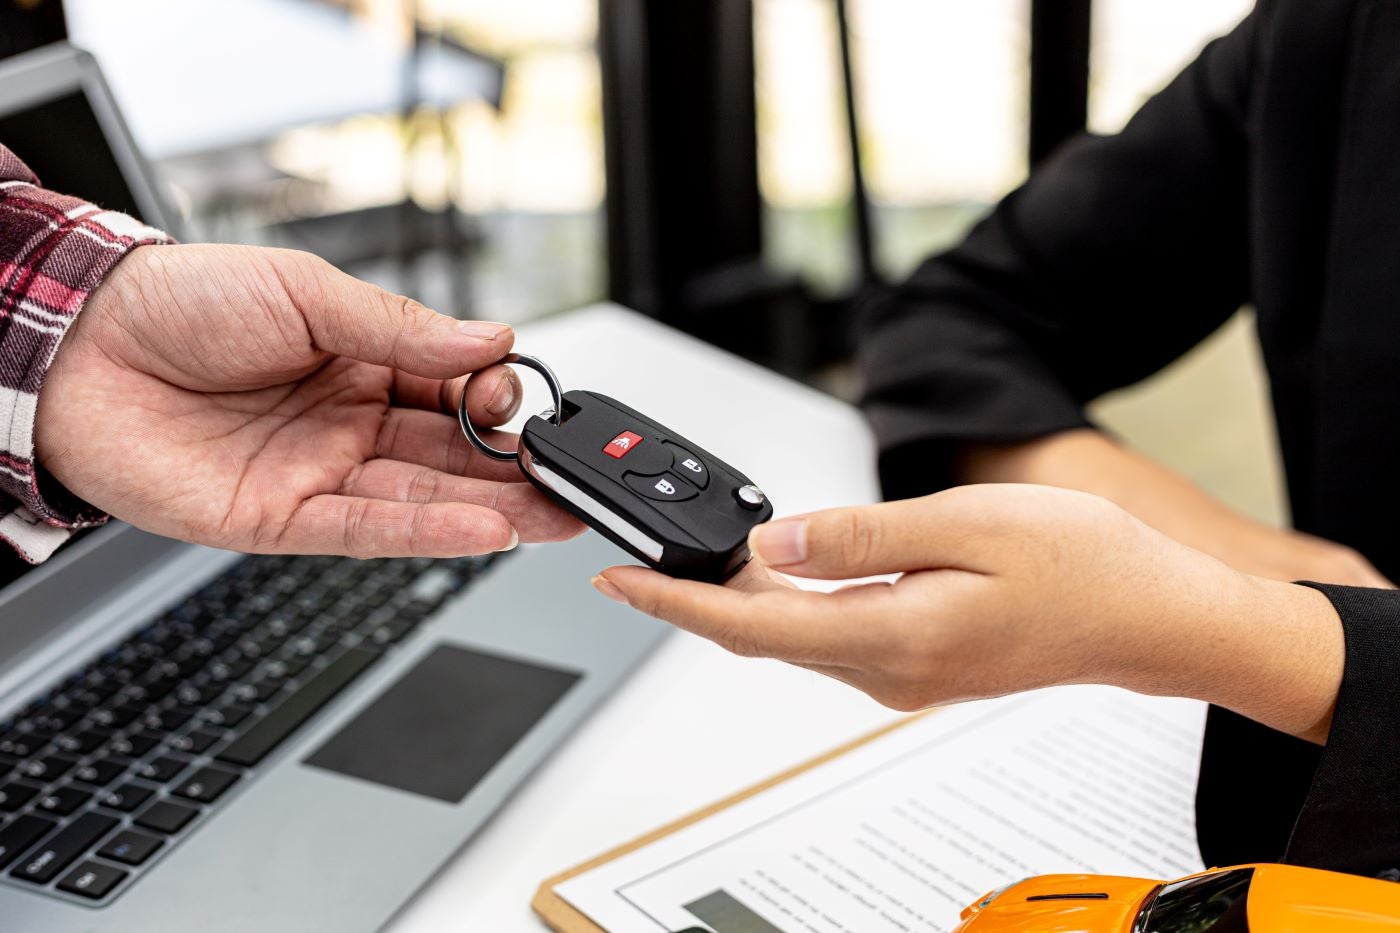 image of someone handing over a car key